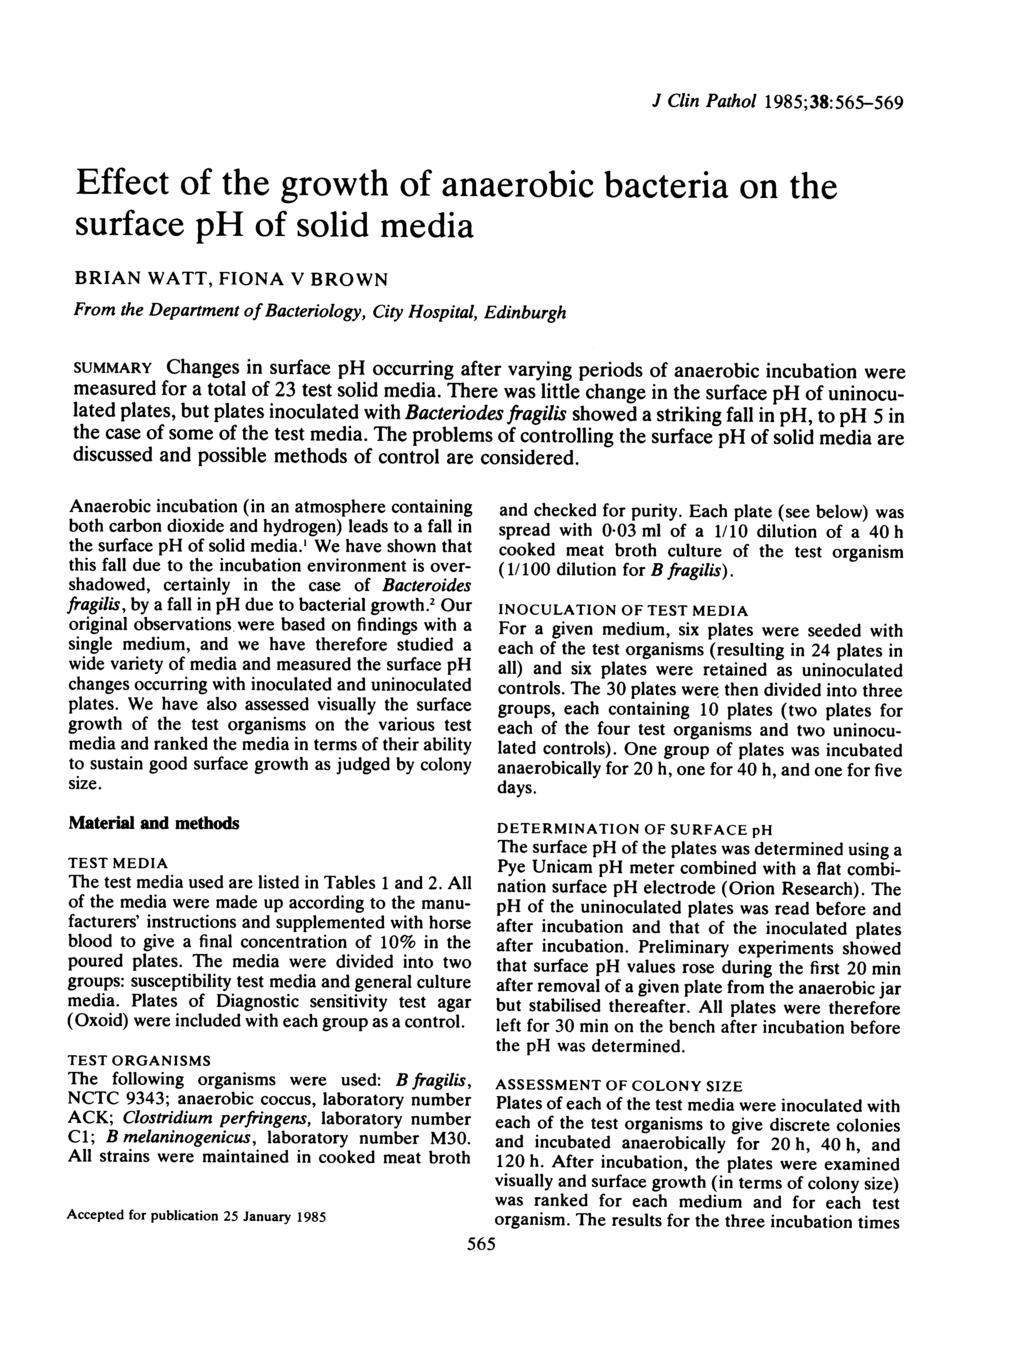 J Clin Pathol 185;38:565-56 Effect of the growth of anaerobic bacteria on the surface ph of solid media BRIAN WATT, FIONA V BROWN From the Department of Bacteriology, City Hospital, Edinburgh SUMMARY